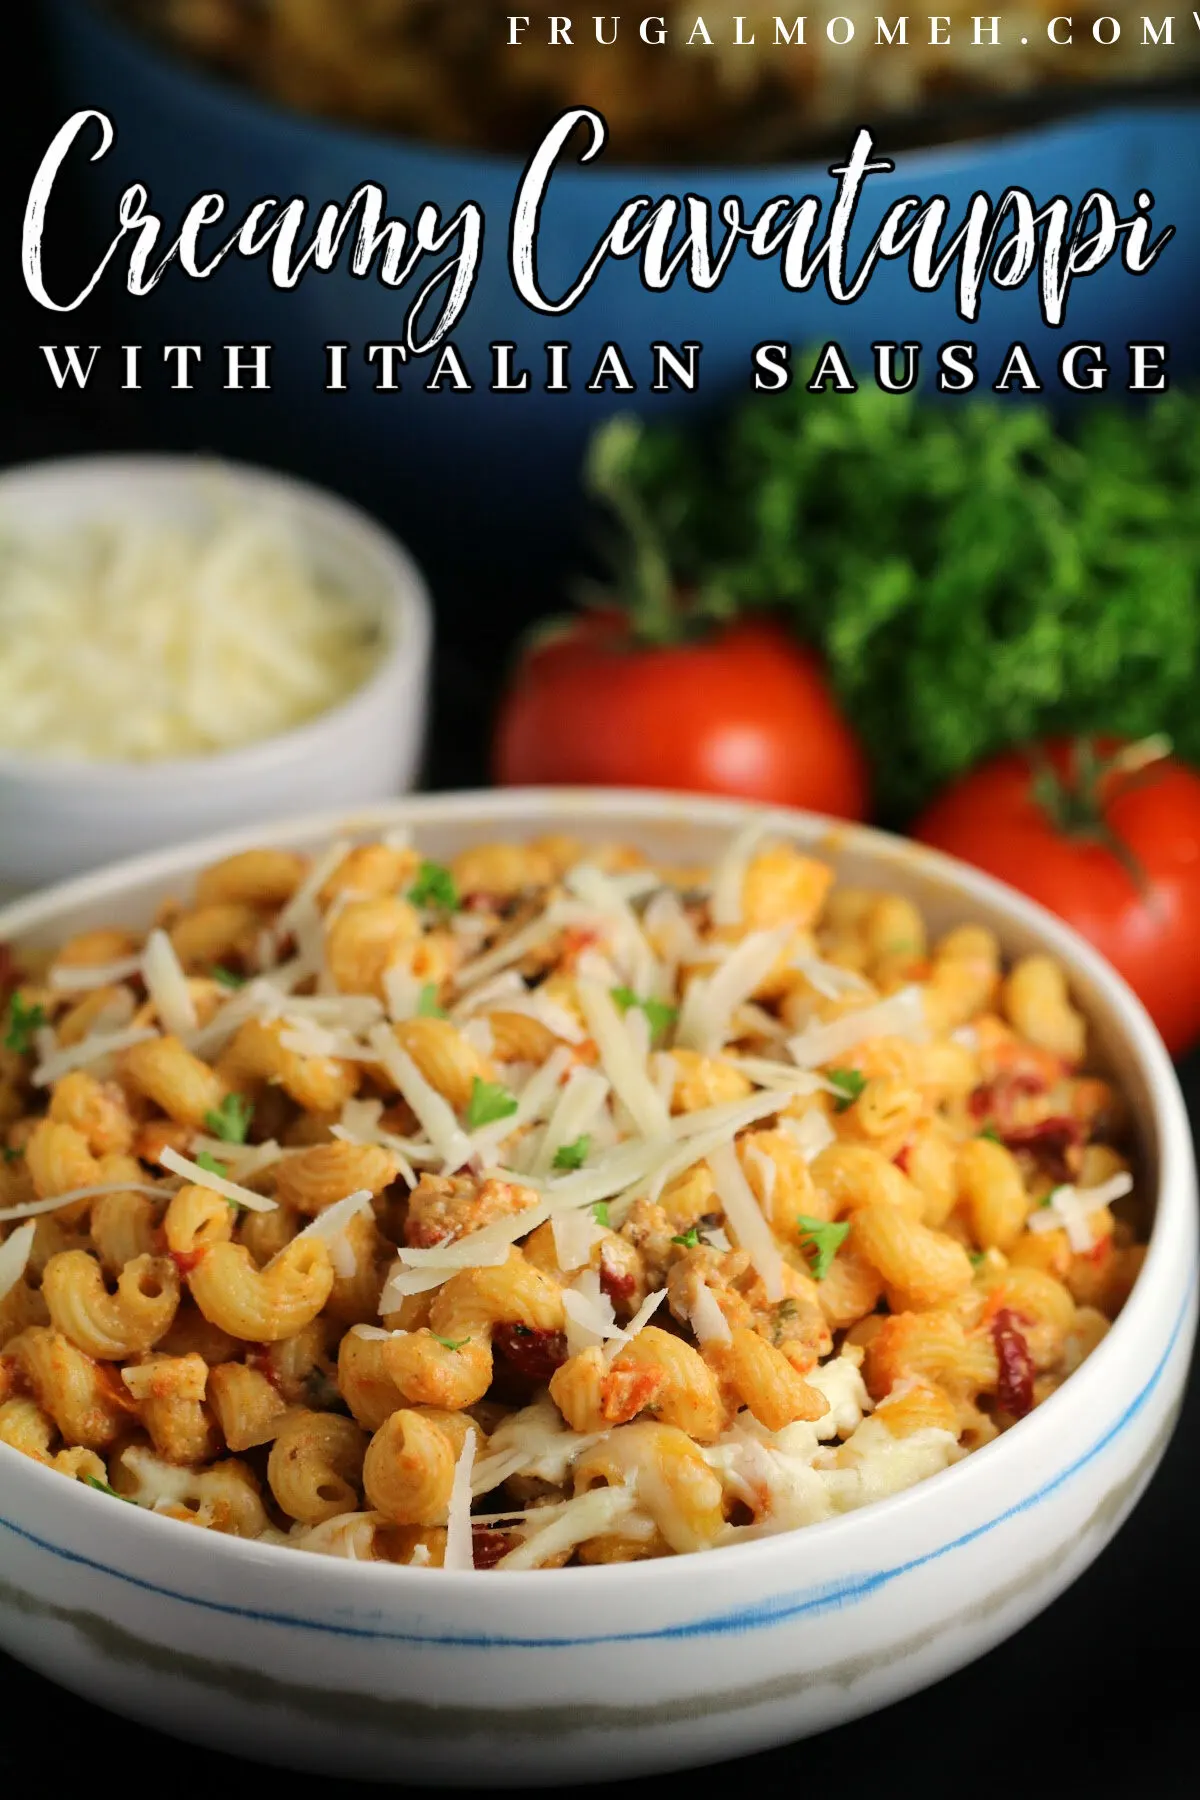 When the weather begins to turn cold, snuggle up with this cozy & Creamy Cavatappi Pasta with Italian Sausage. It's a tasty family dinner.